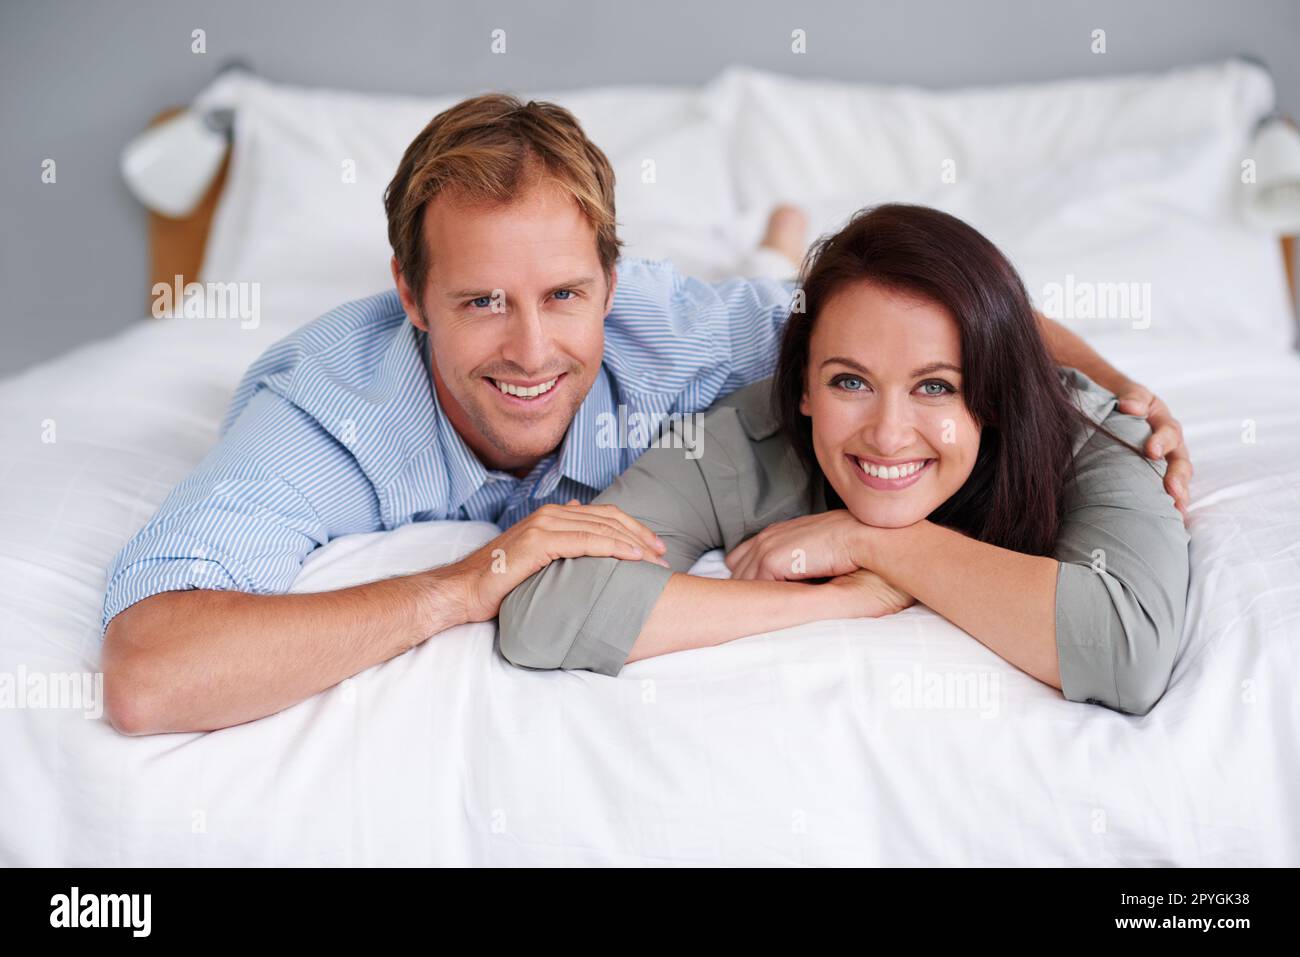 The weekend menu Rest and relaxation. Portrait of a happy young couple lying on their bed at home. Stock Photo